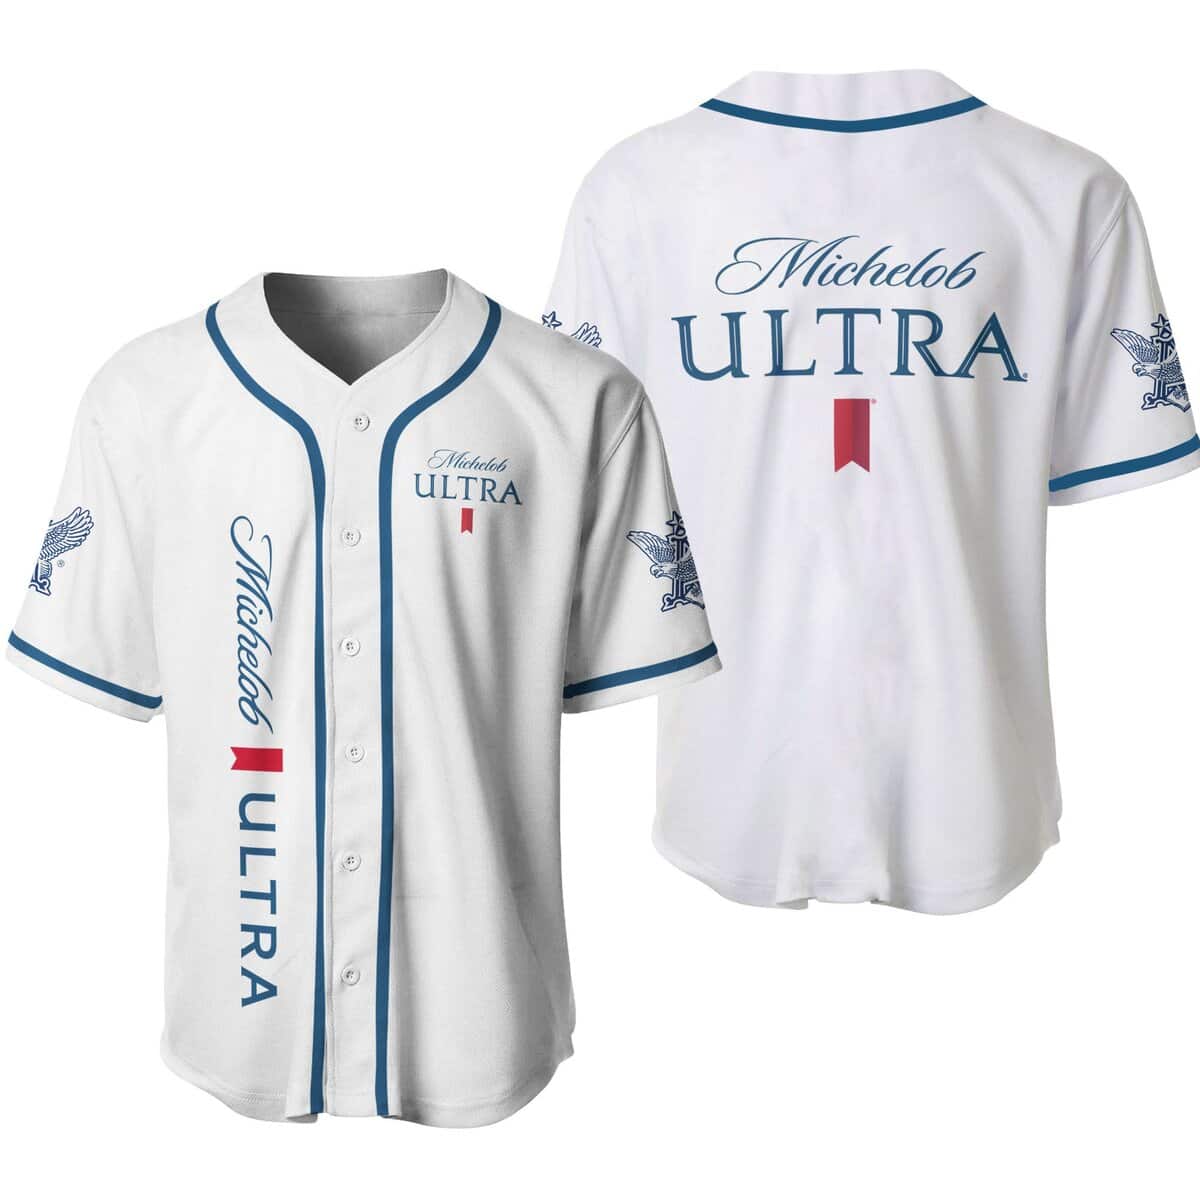 White Michelob ULTRA Baseball Jersey Gift For Family